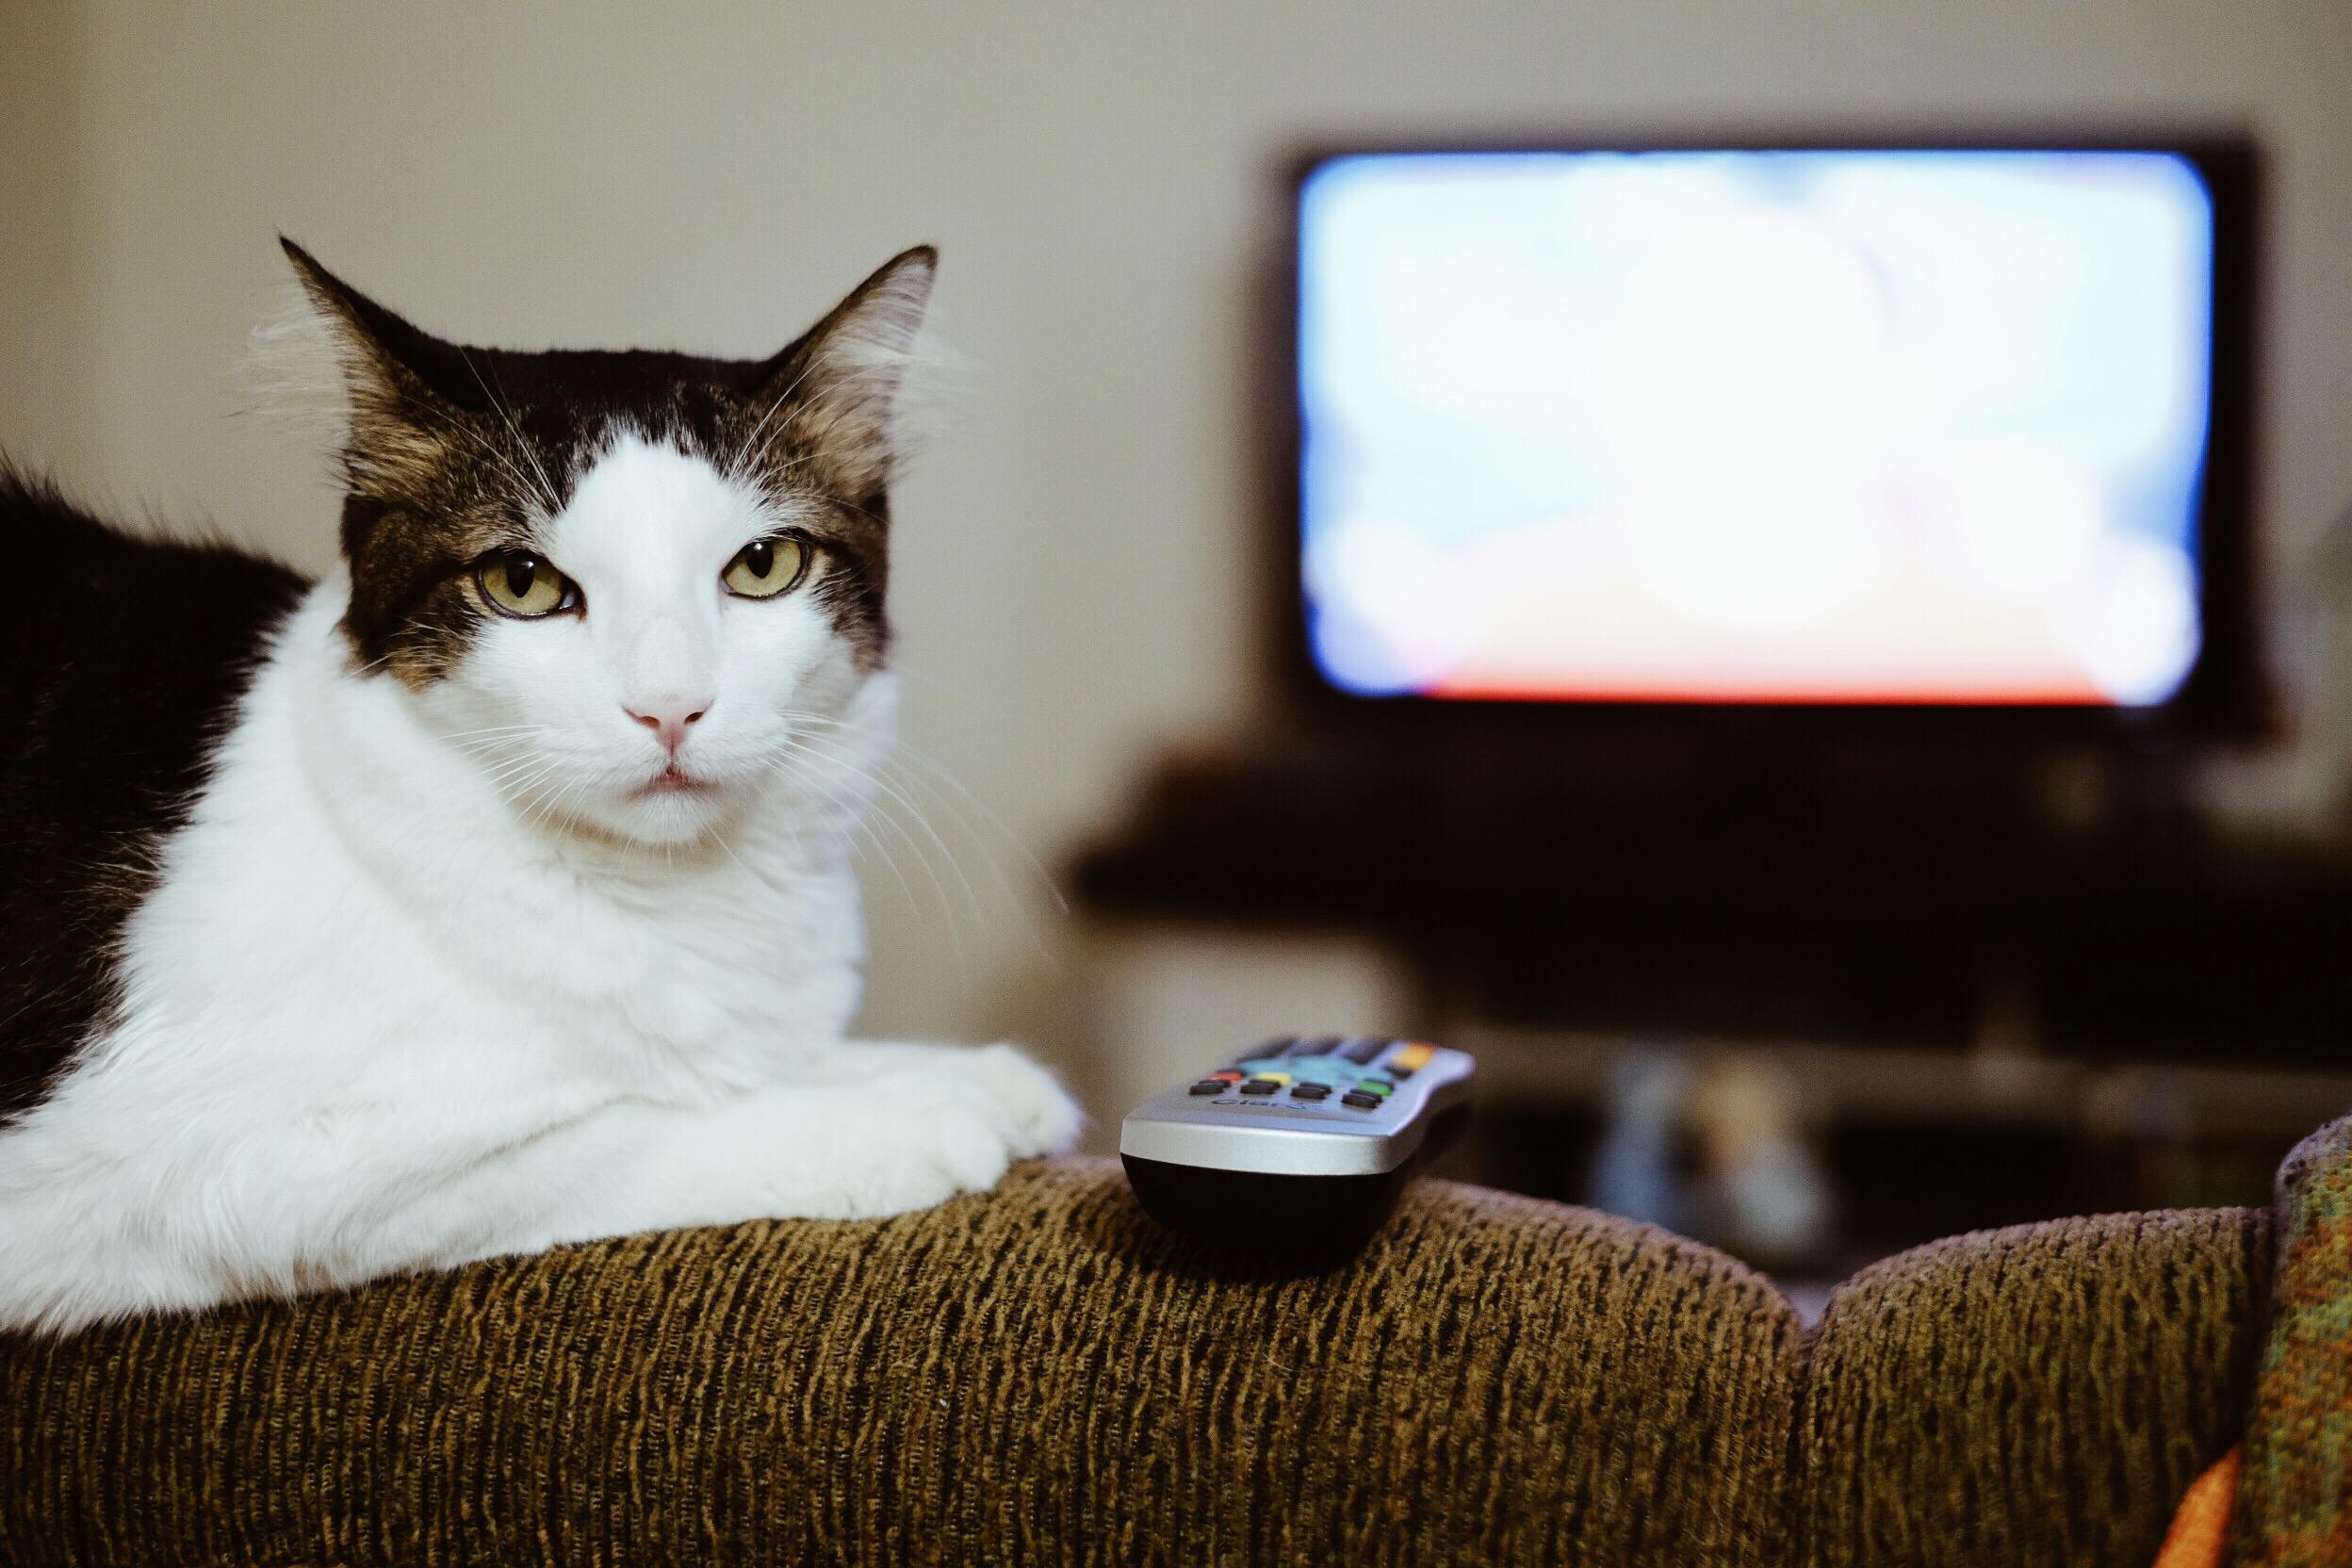 A cat sitting on the back of a couch next to a remote and a TV